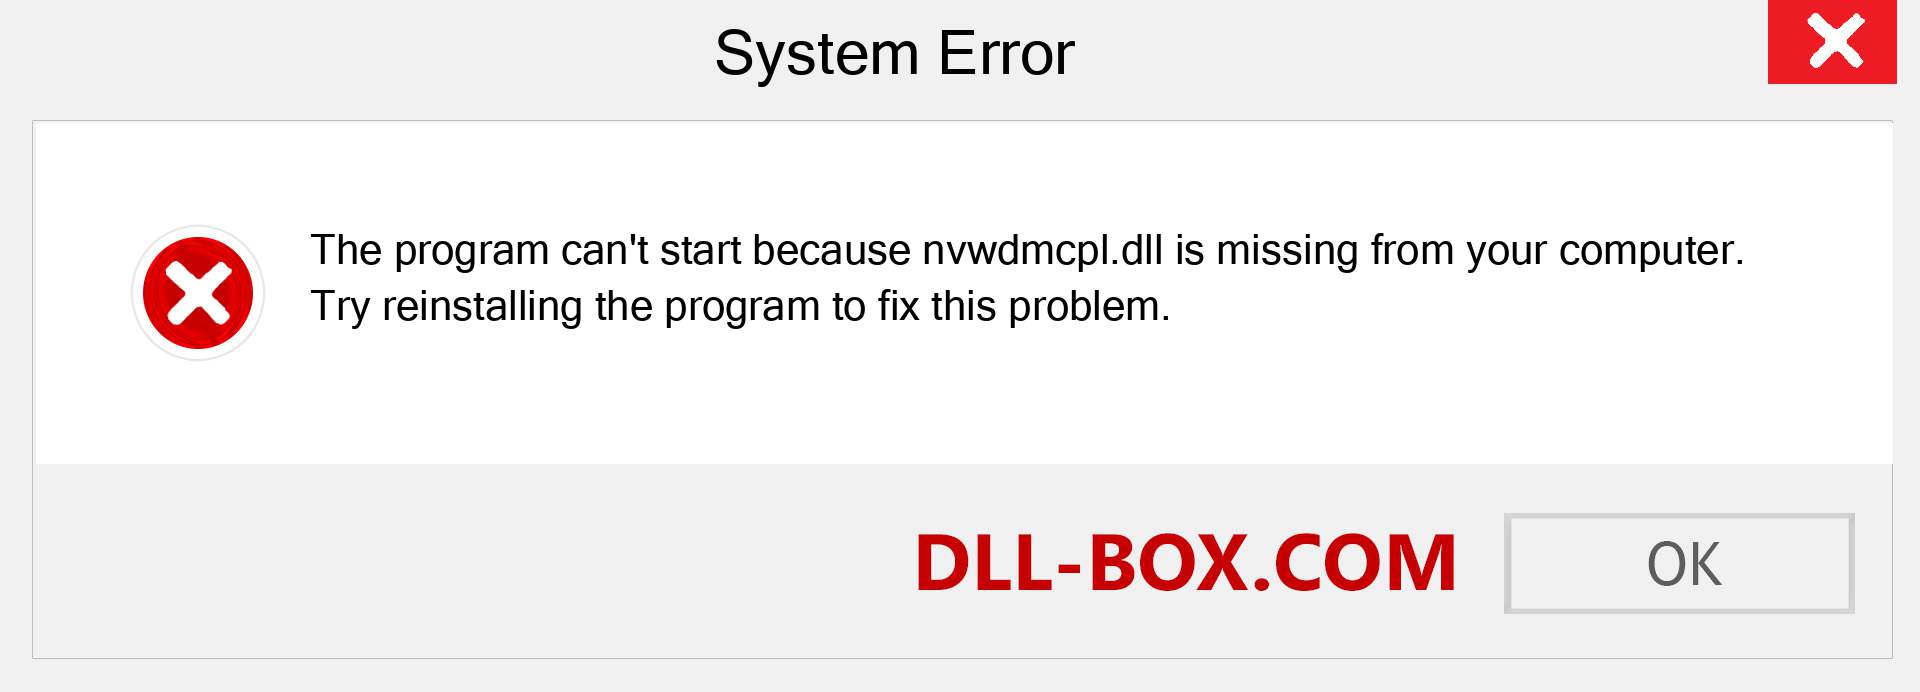  nvwdmcpl.dll file is missing?. Download for Windows 7, 8, 10 - Fix  nvwdmcpl dll Missing Error on Windows, photos, images